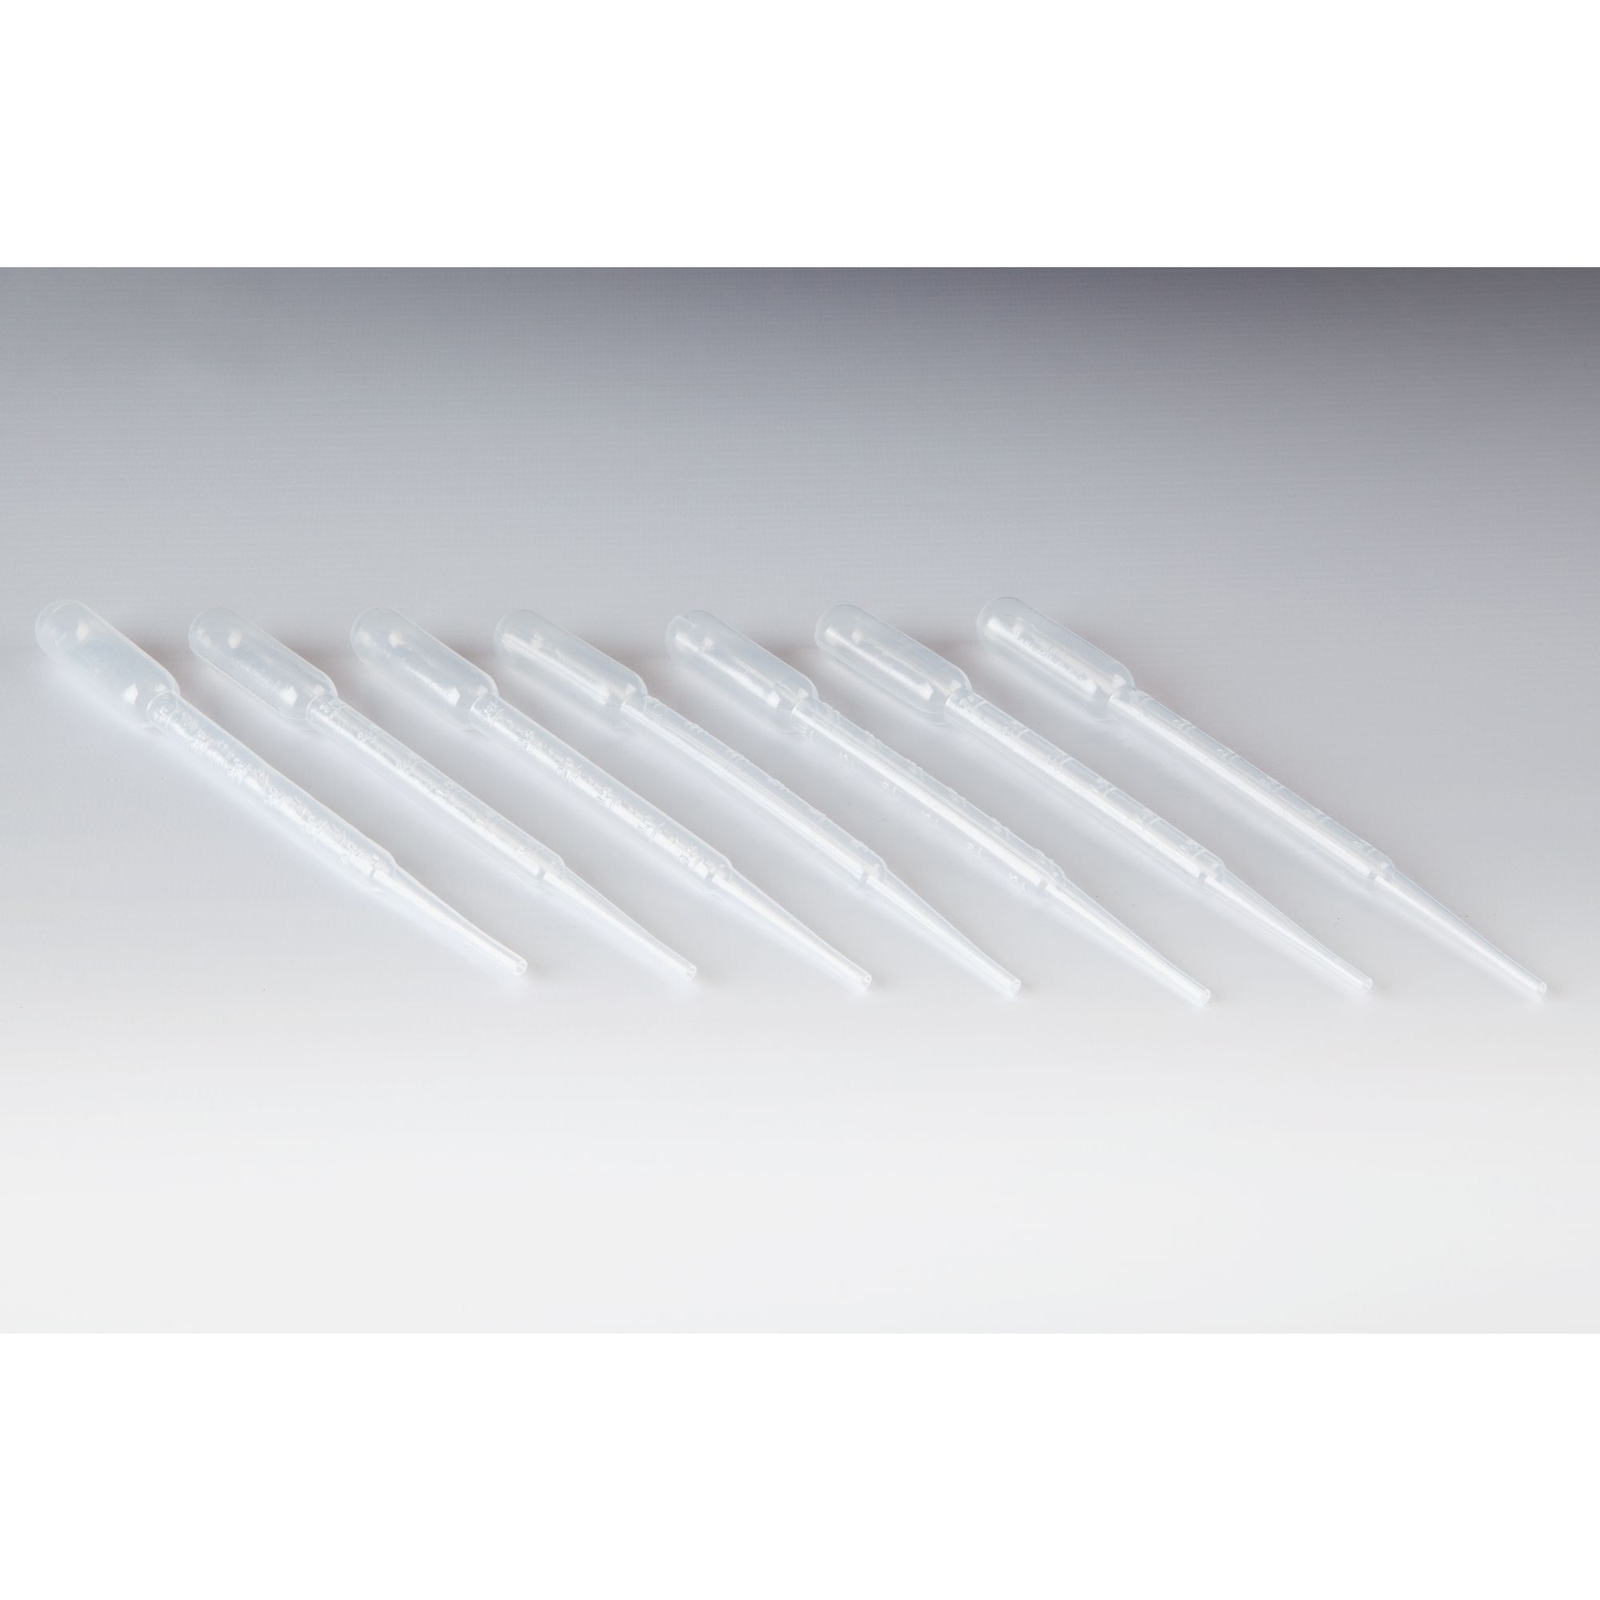 Disposable, Graduated, Pipettes - 3 x 0.5mL - 155mm